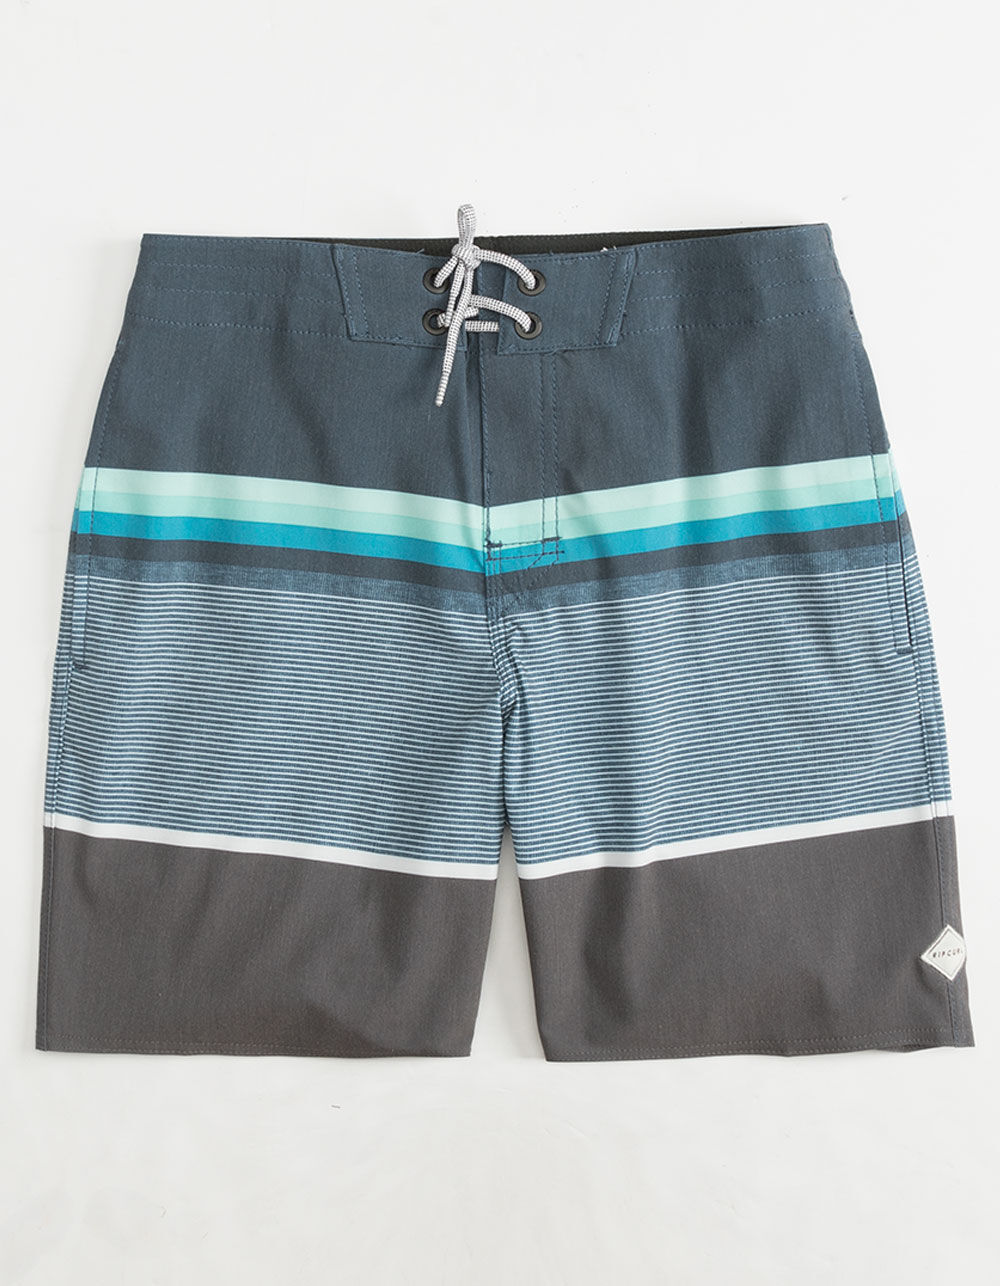 RIP CURL Rapture Lay Day Boys Boardshorts - BLUE COMBO | Tillys